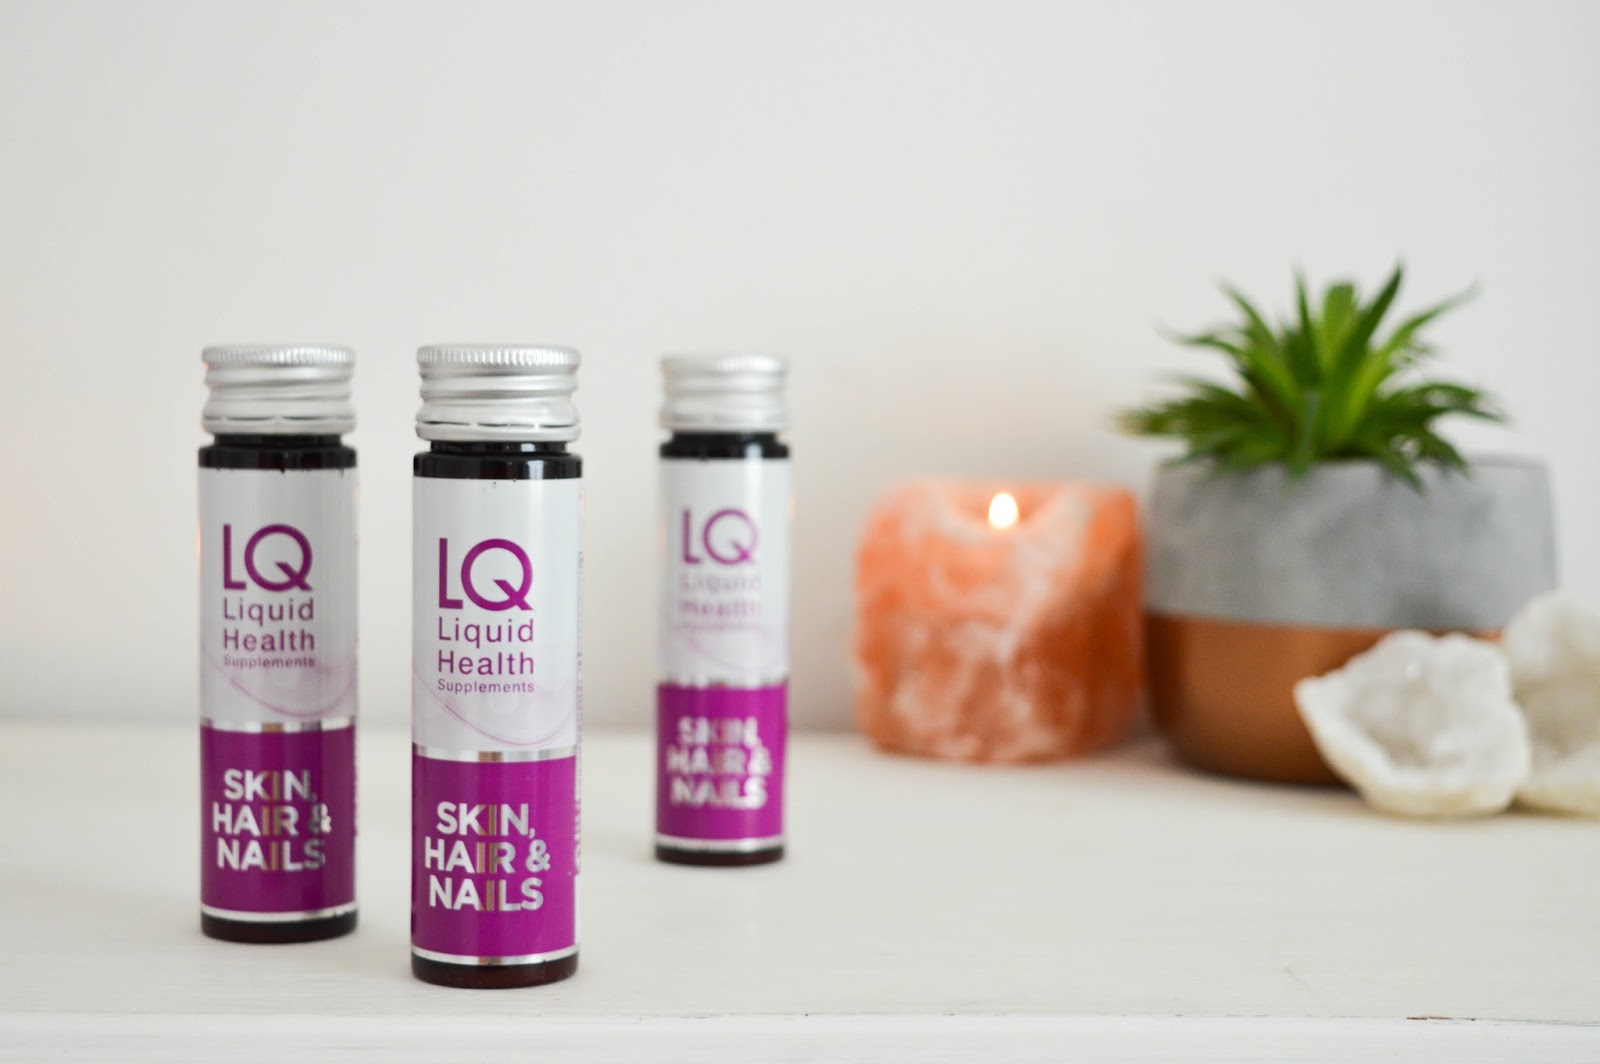 LQ Liquid Health Skin Hair and Nails review, Hampshire lifestyle blog, beauty bloggers UK